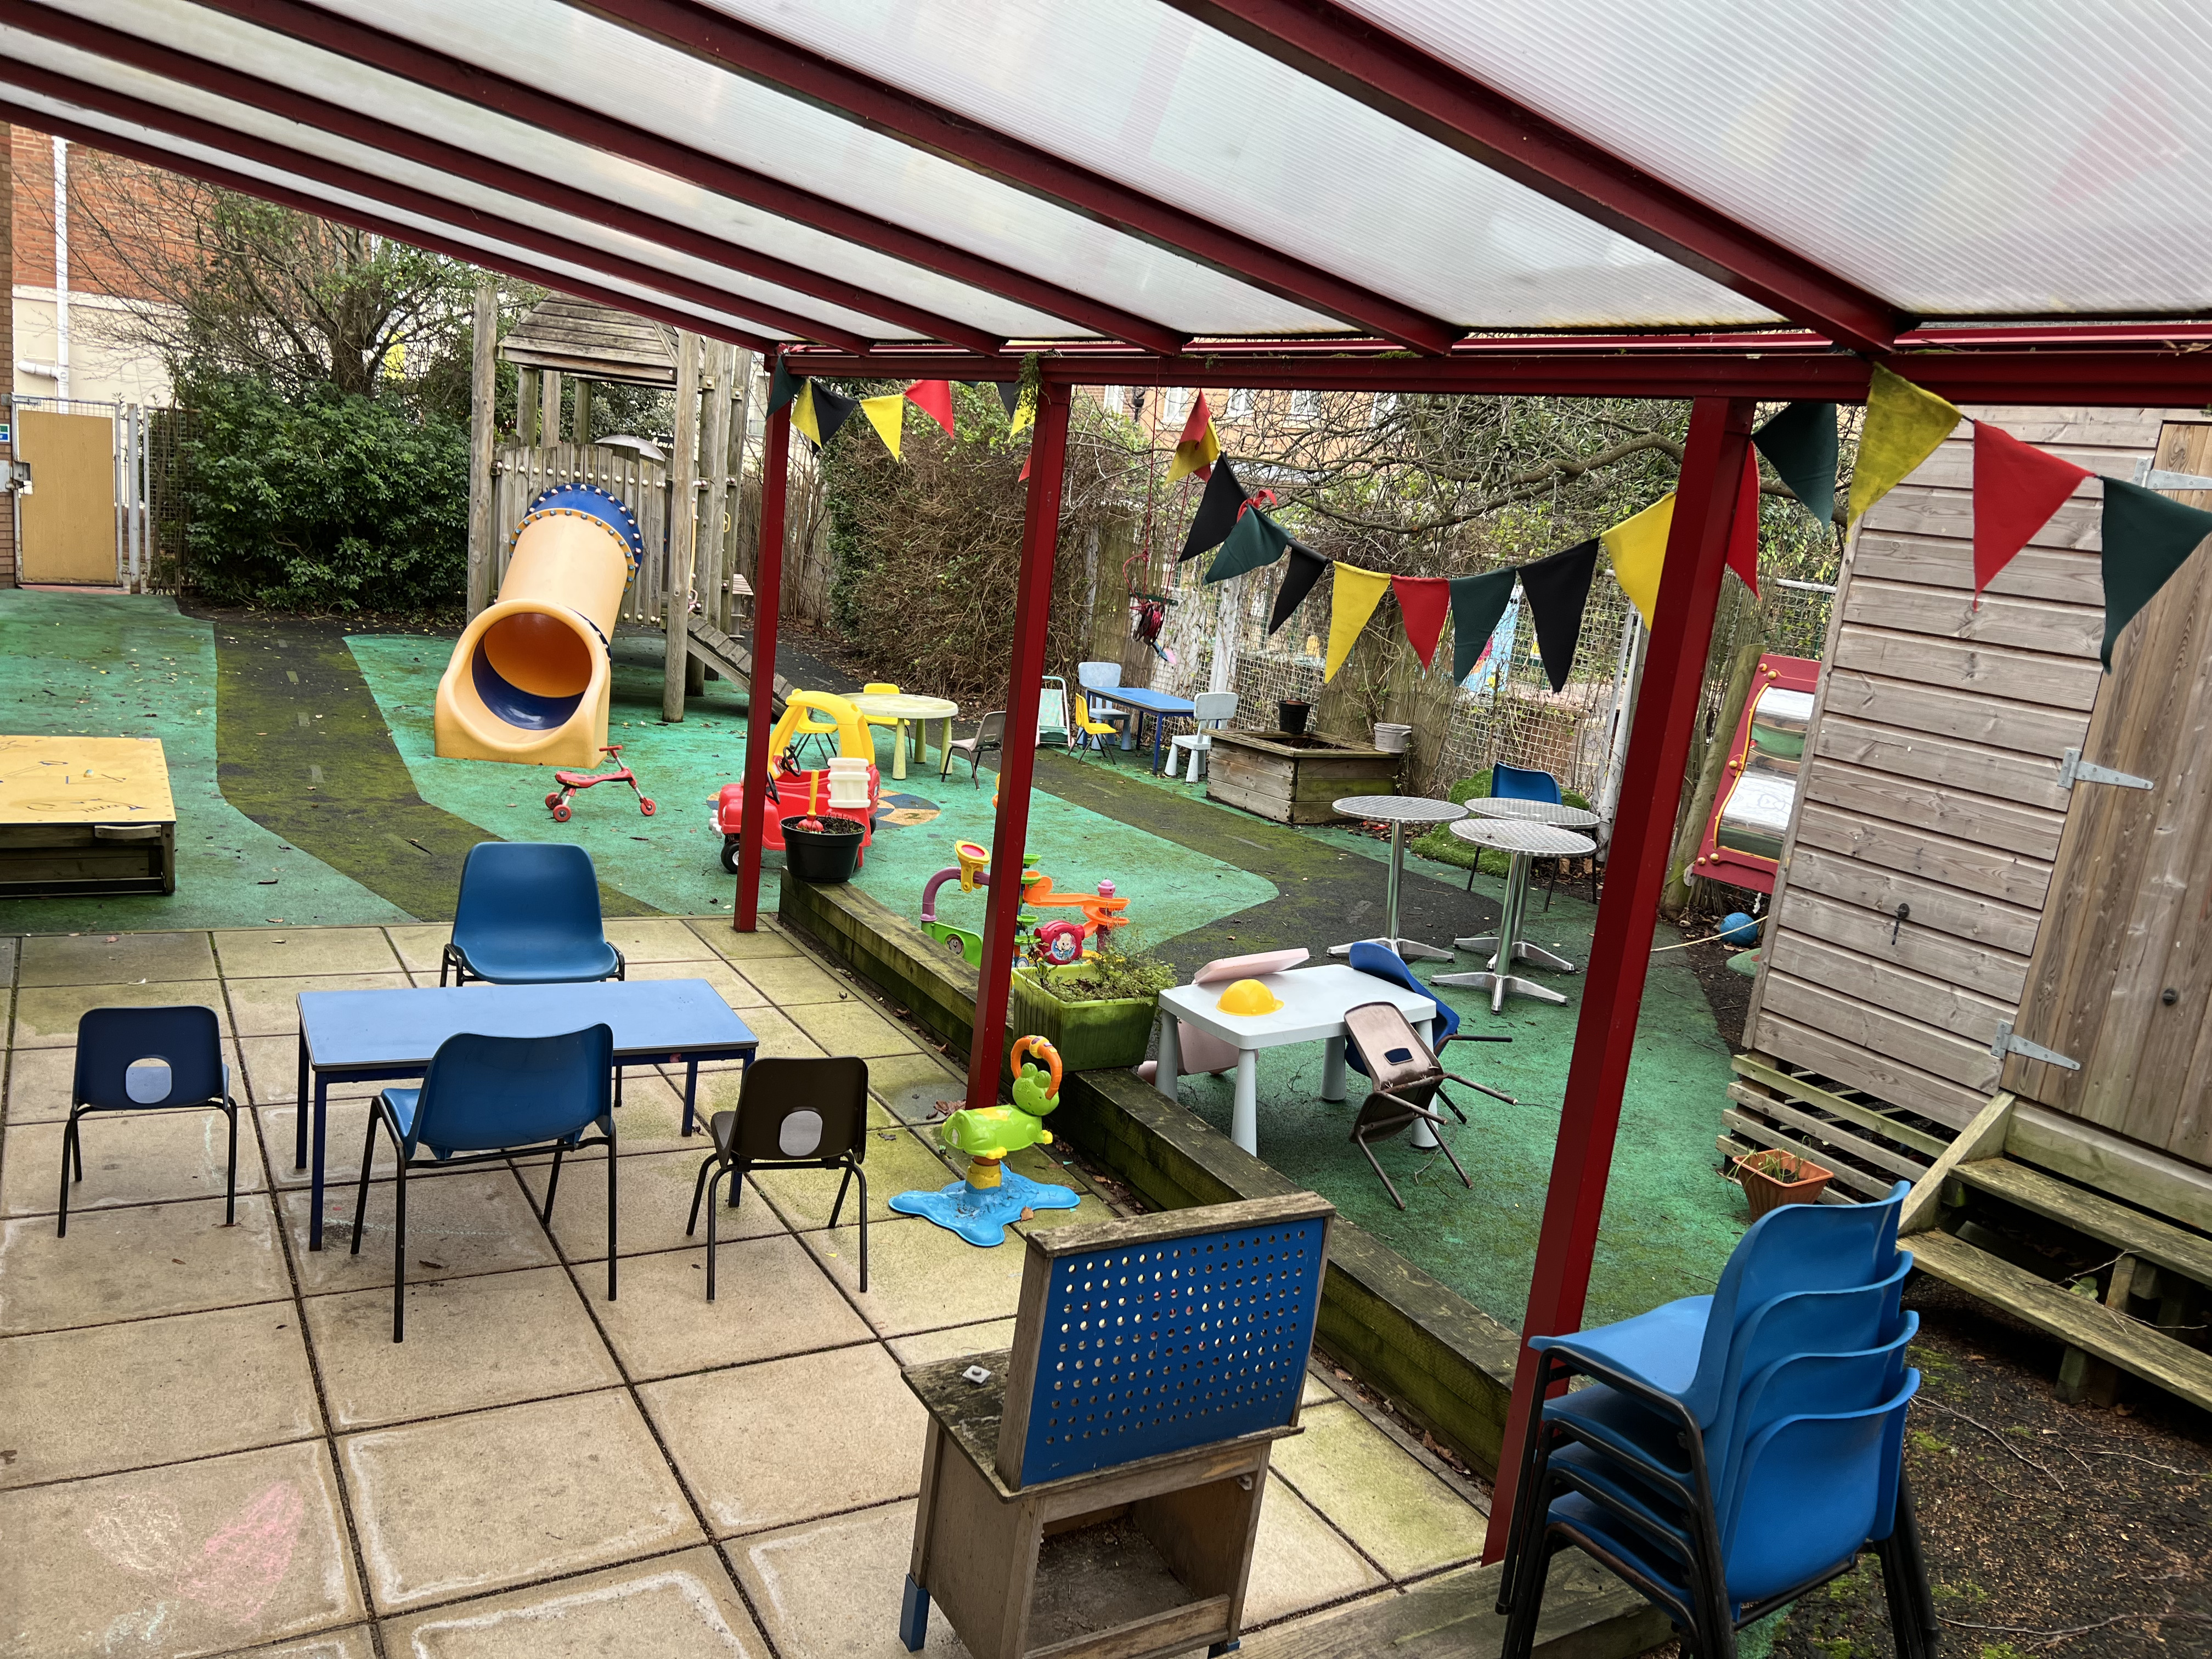 Children's outdoor enclosed play space with equipment and toys